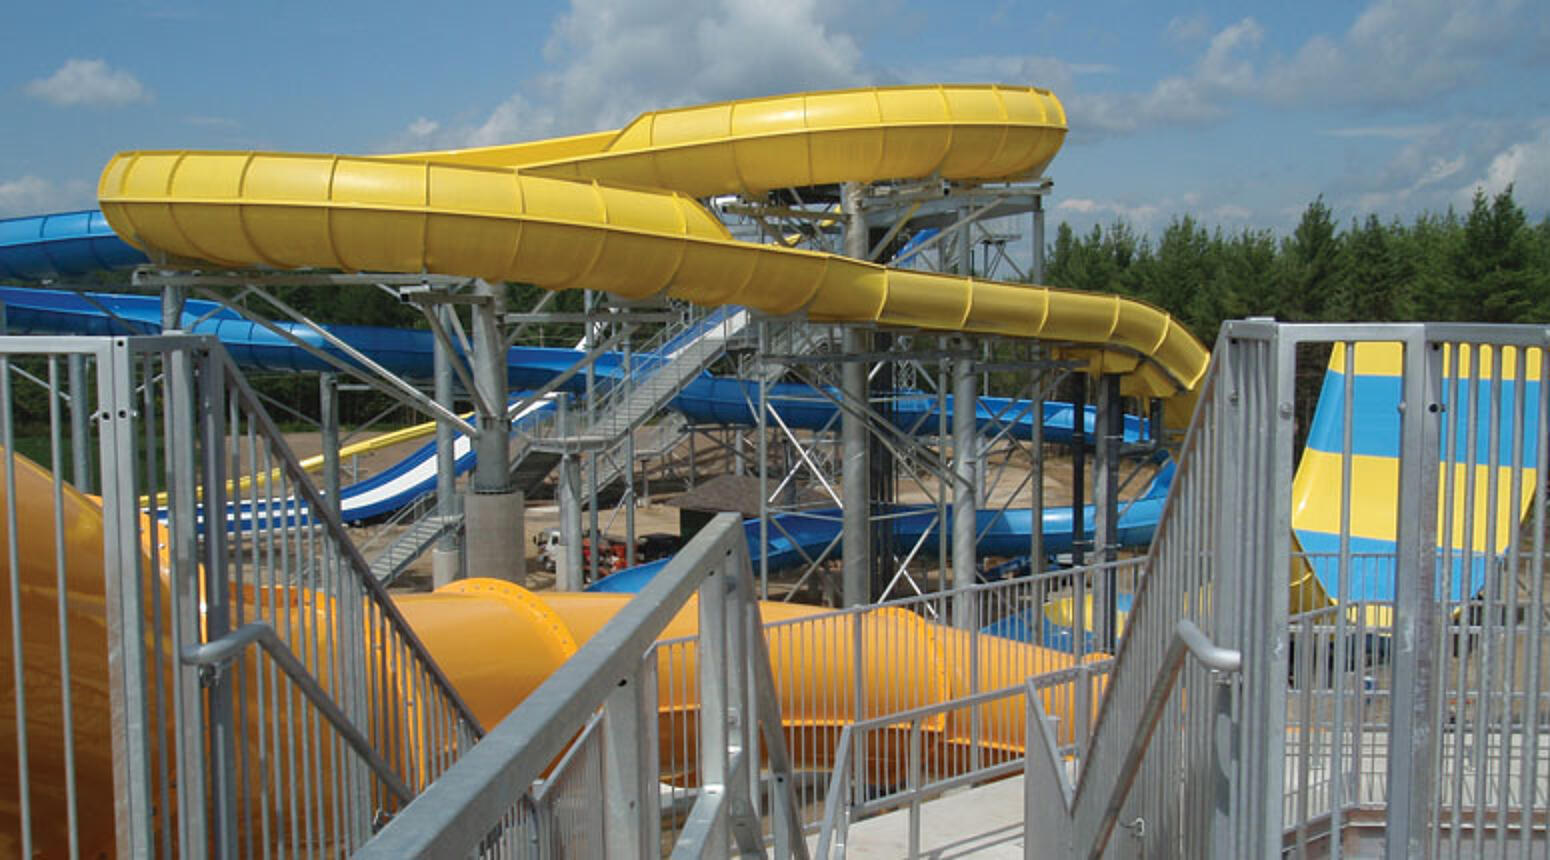 Calipso Water Park